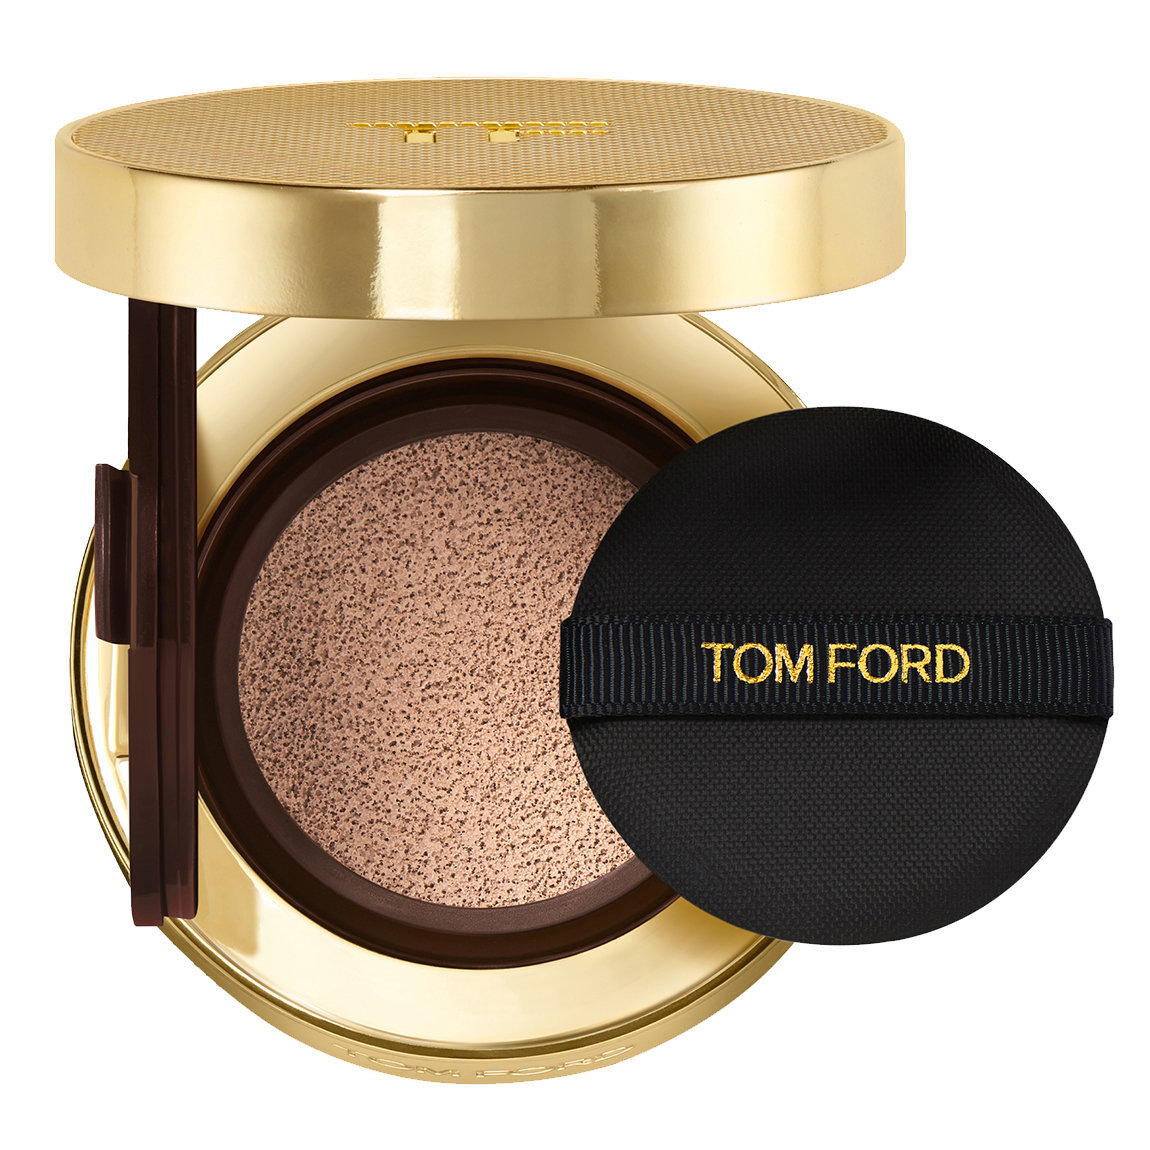 TOM FORD Shade and Illuminate Soft Radiance Foundation Cushion Compact 6.5 Sable alternative view 1.